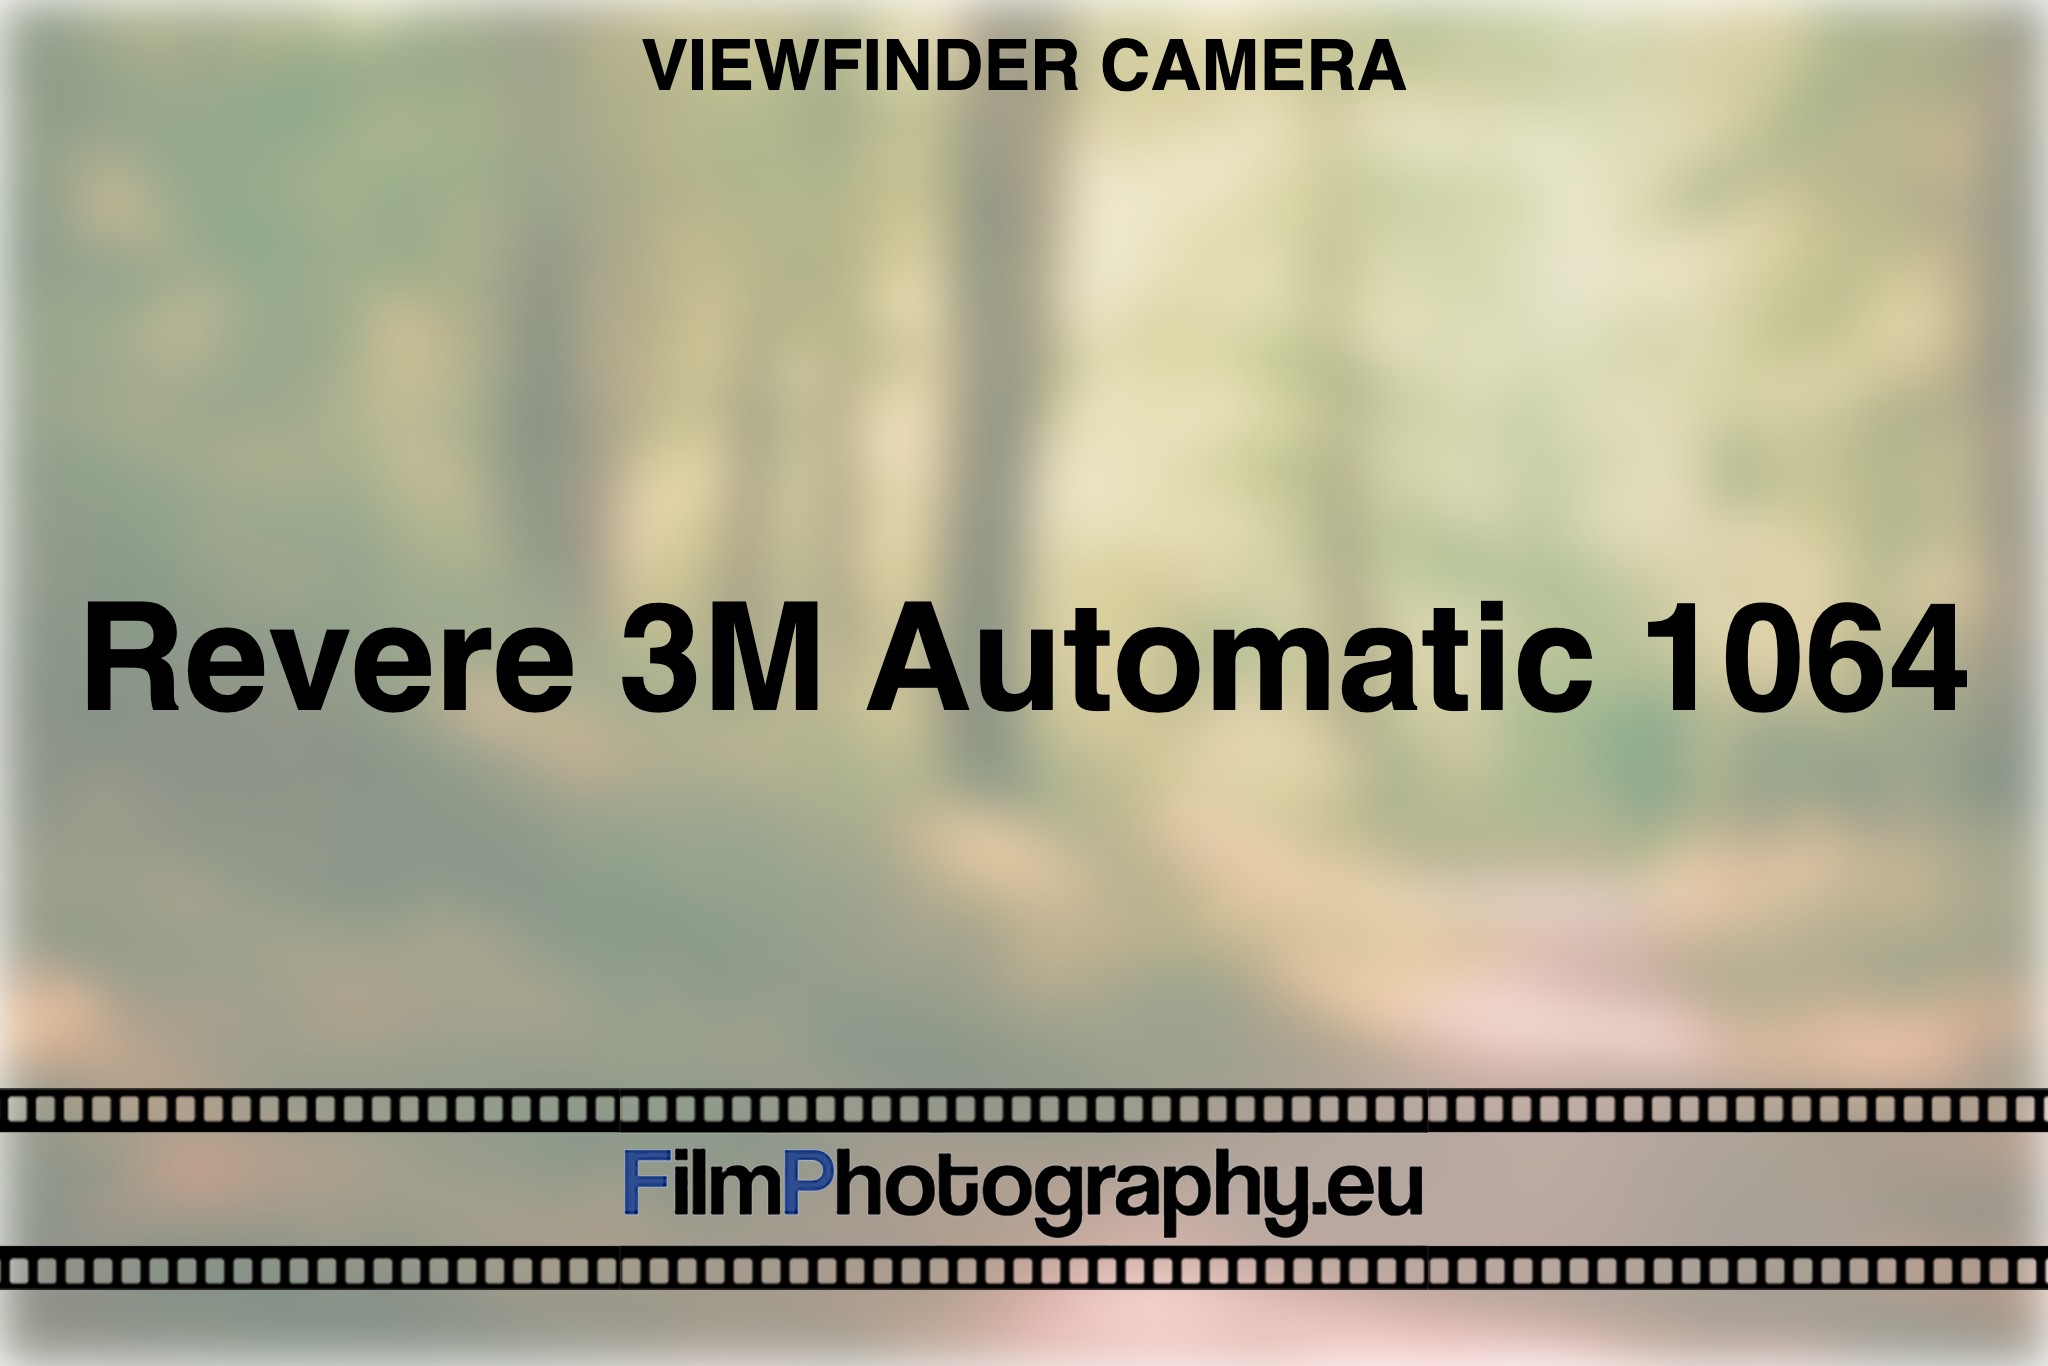 revere-3m-automatic-1064-viewfinder-camera-bnv